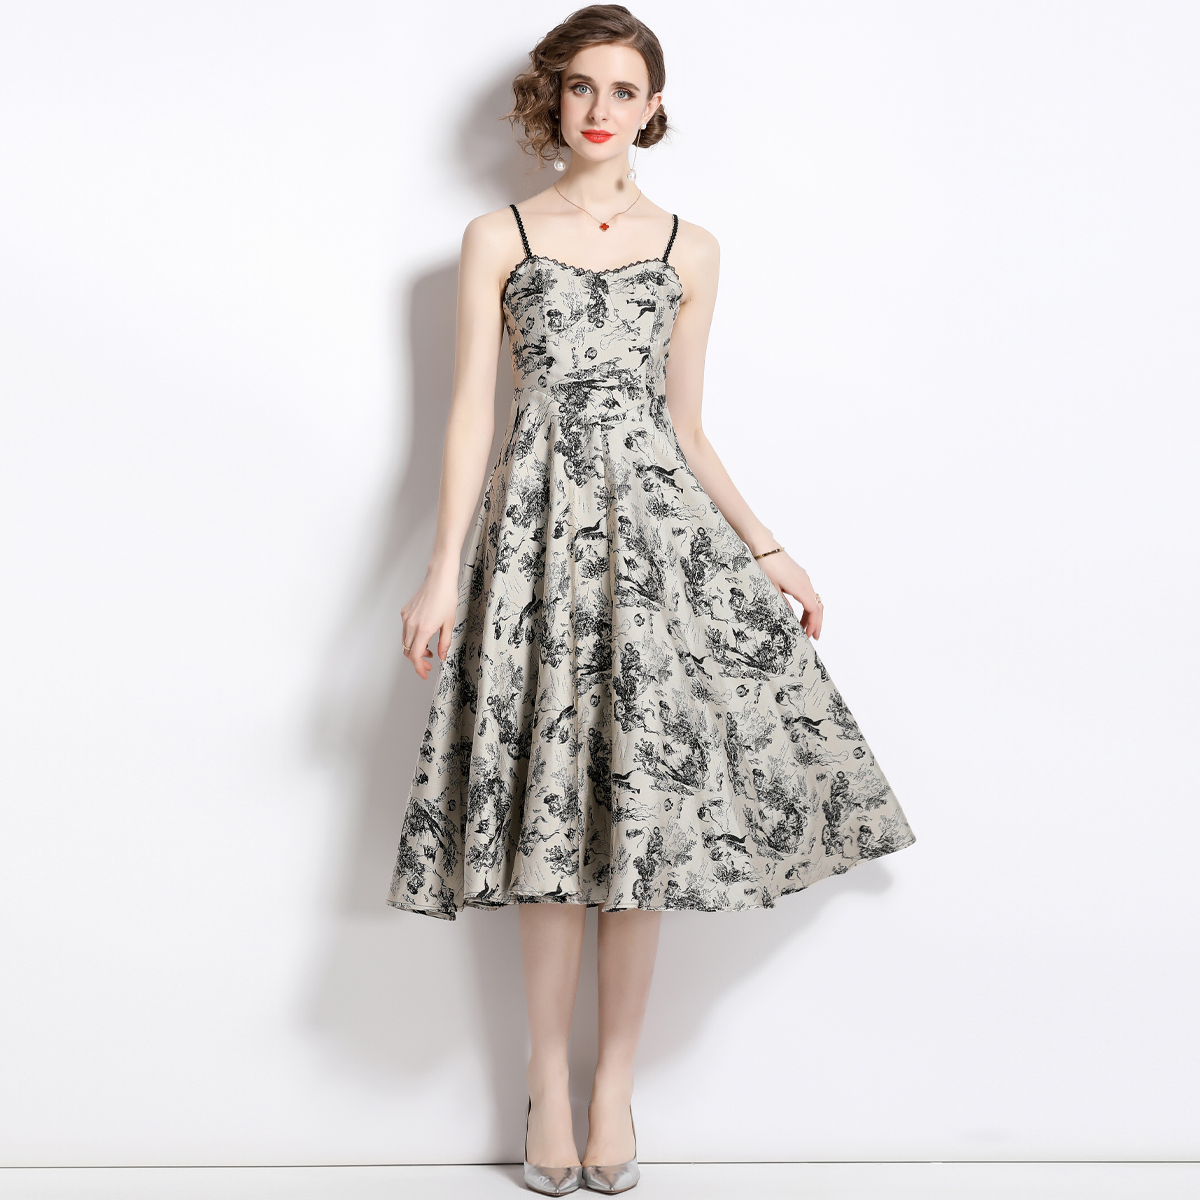 Floral pinched waist long dress France style dress